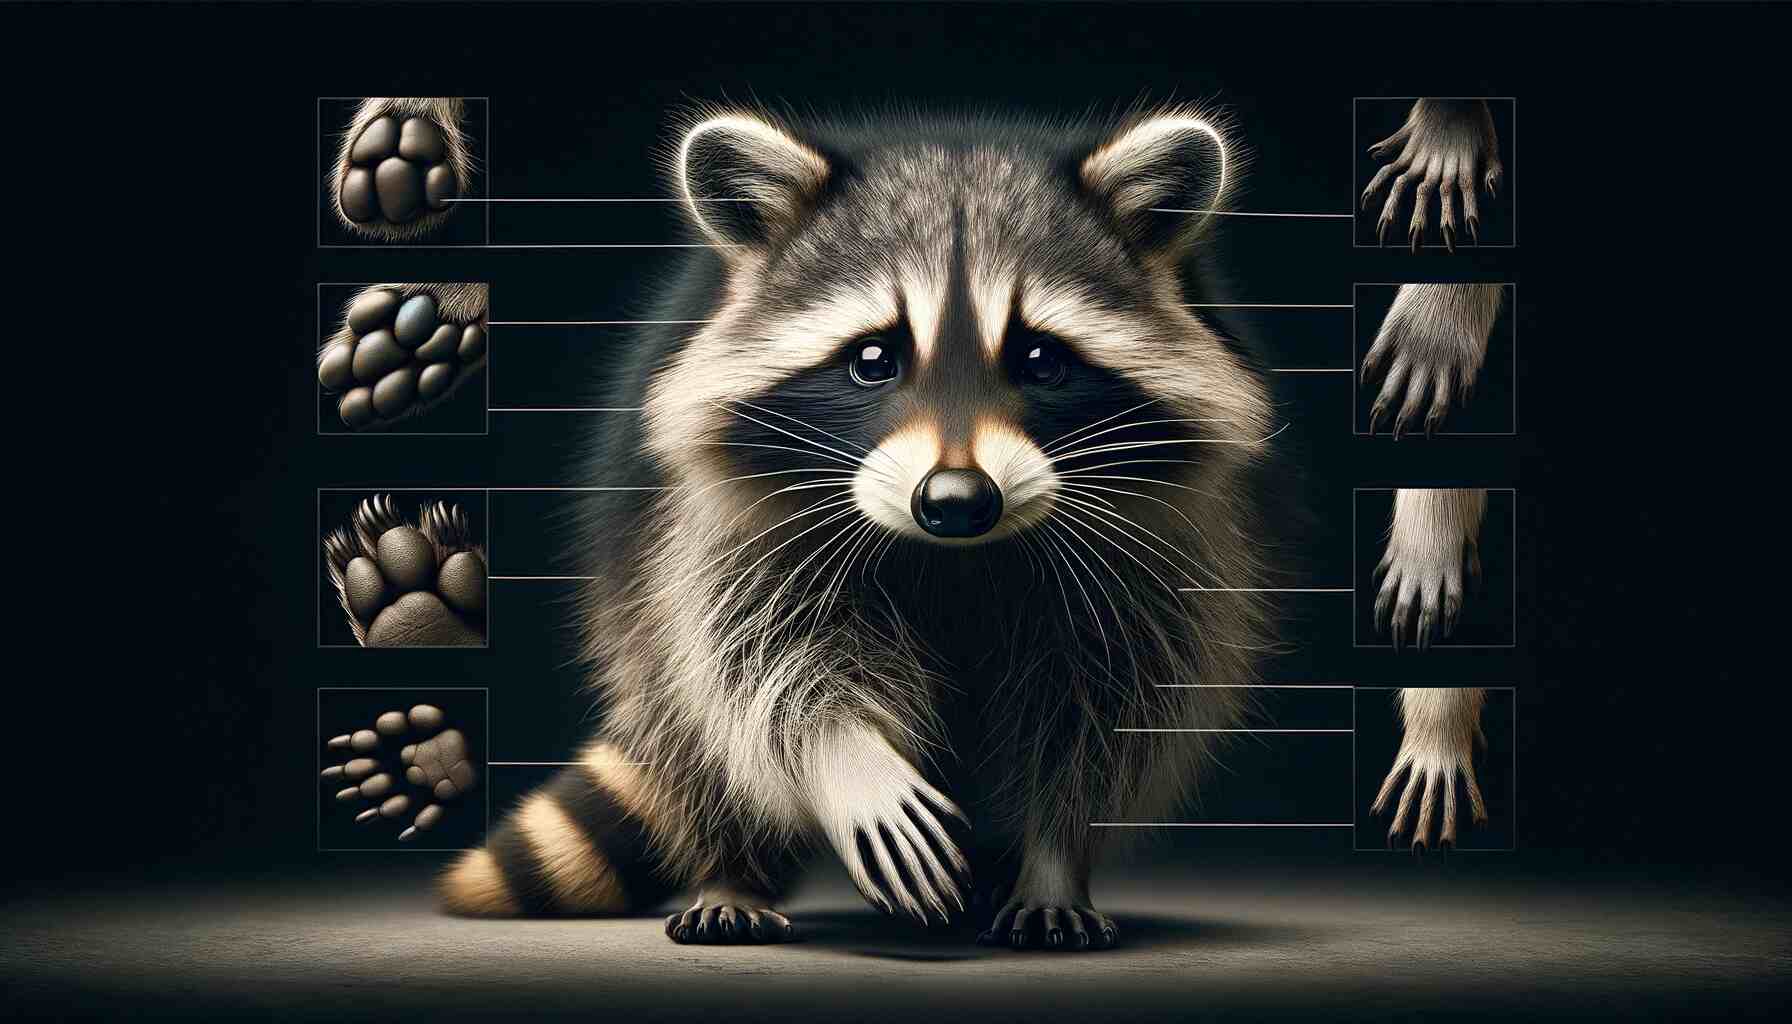 Here is a close-up image of a raccoon that showcases its physical characteristics in detail. This visual highlights the raccoon's size, the texture of its fur, its distinctive facial features including the black mask and white cheeks, the dexterity of its front paws, and its bushy, ringed tail. The image provides a clear view of these features, emphasizing the unique adaptations and appearance of the raccoon in its natural setting.